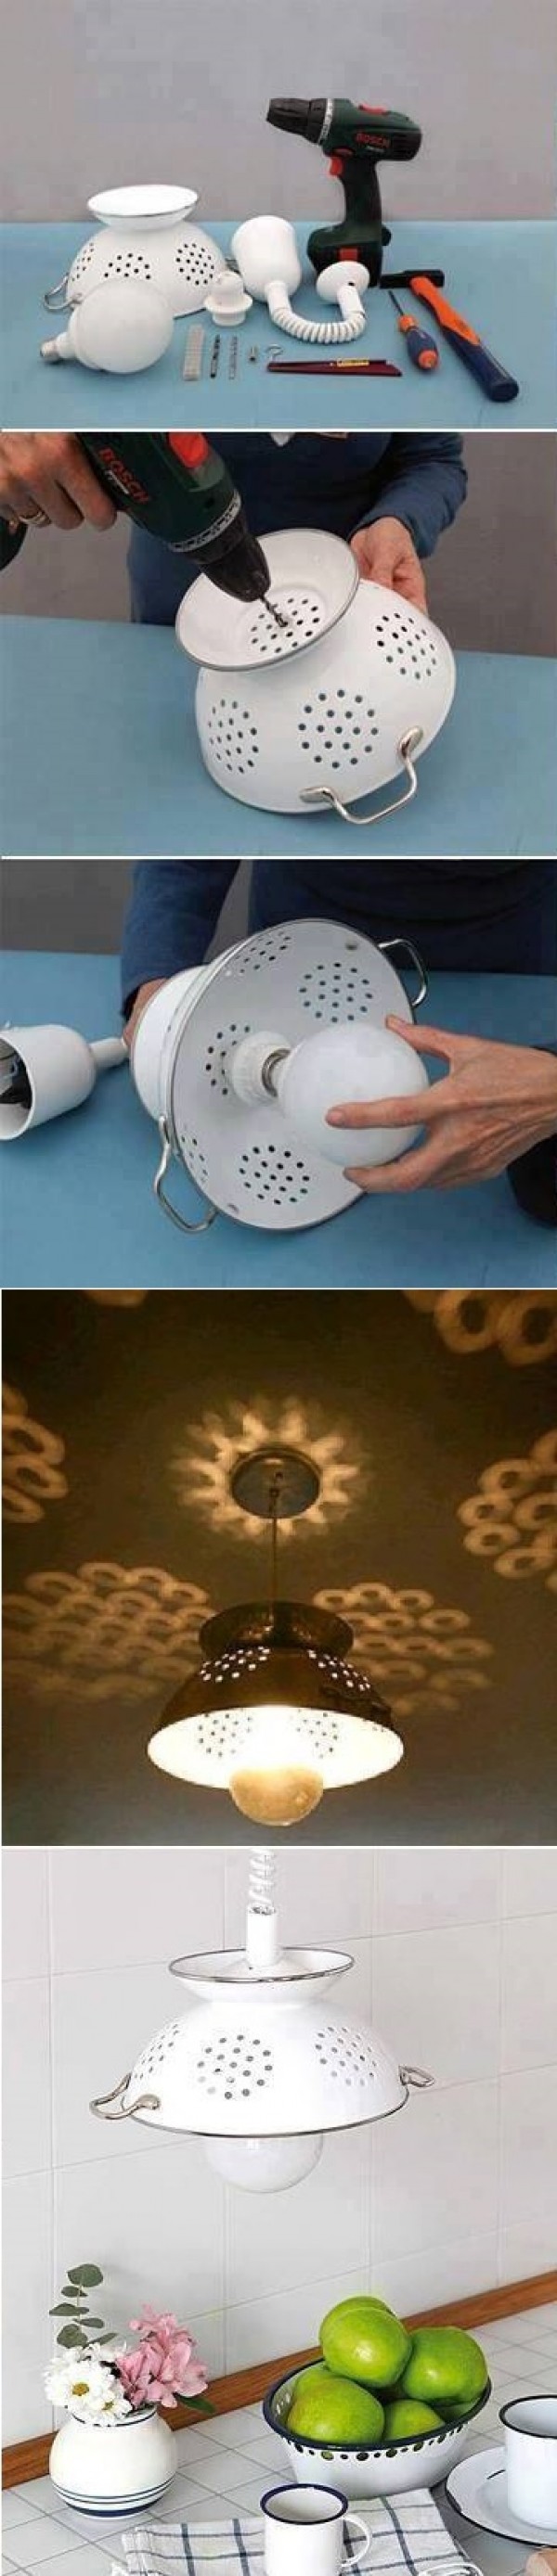 How to make a DIY kitchen strainer lamp